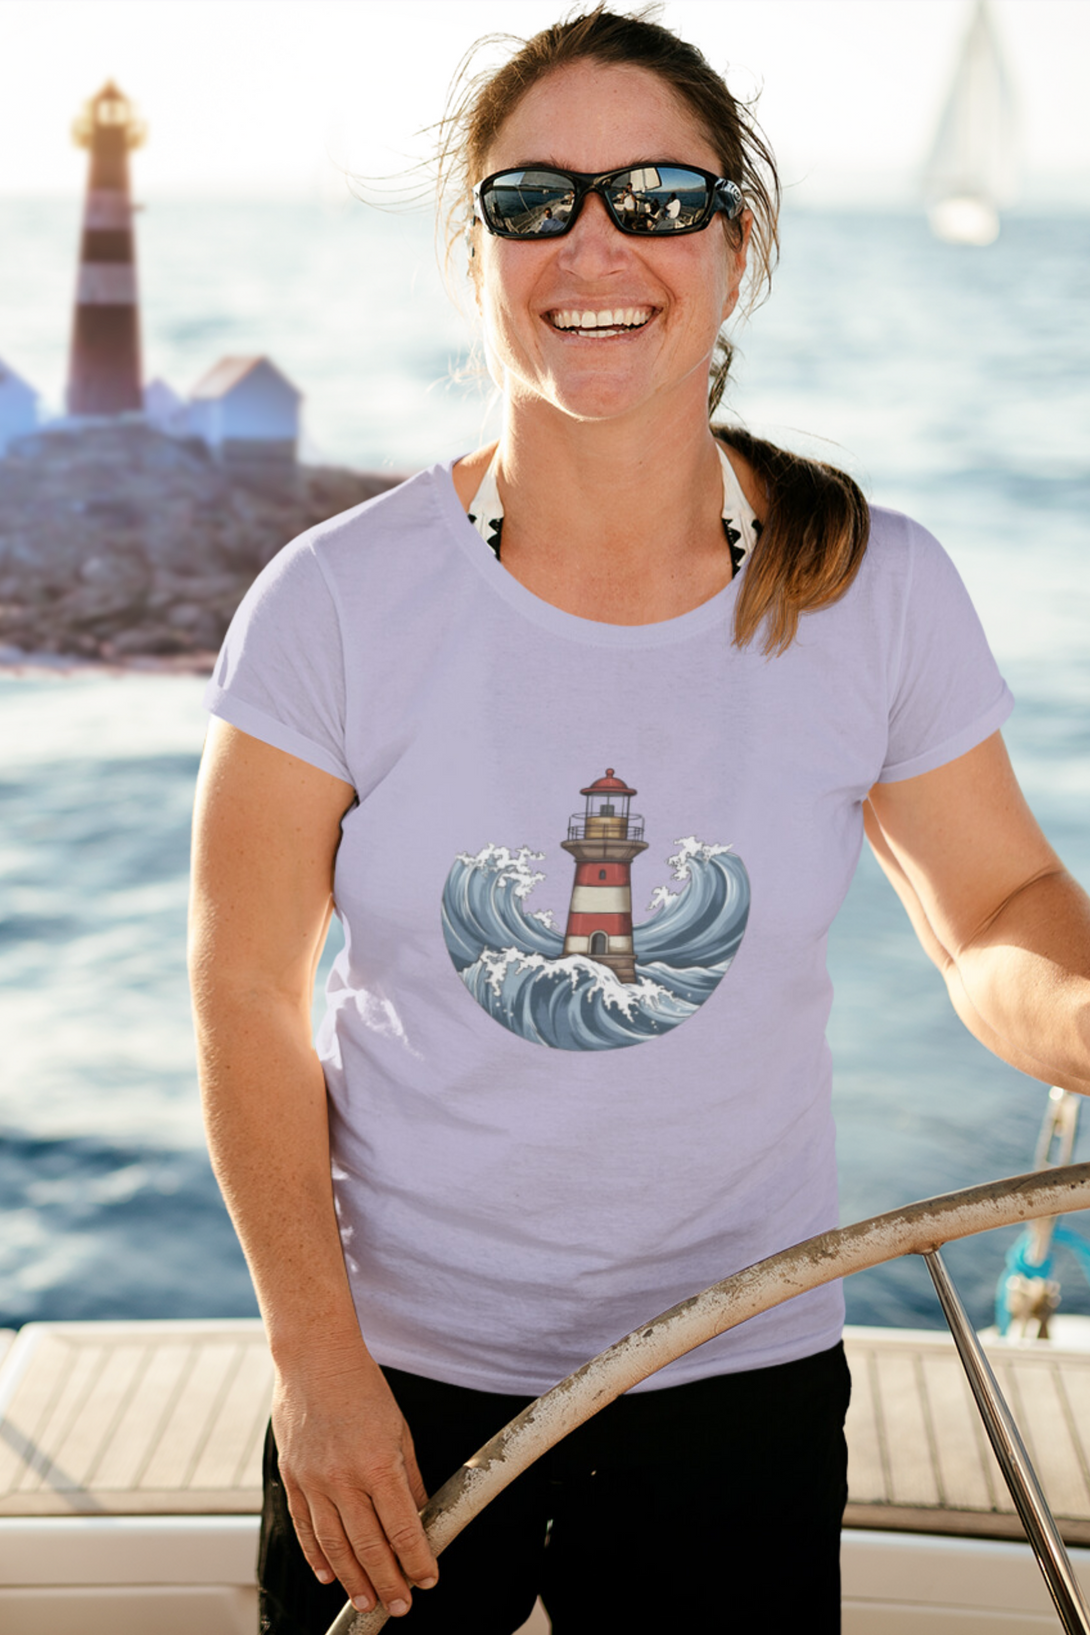 Lighthouse And Waves Printed T-Shirt For Women - WowWaves - 4